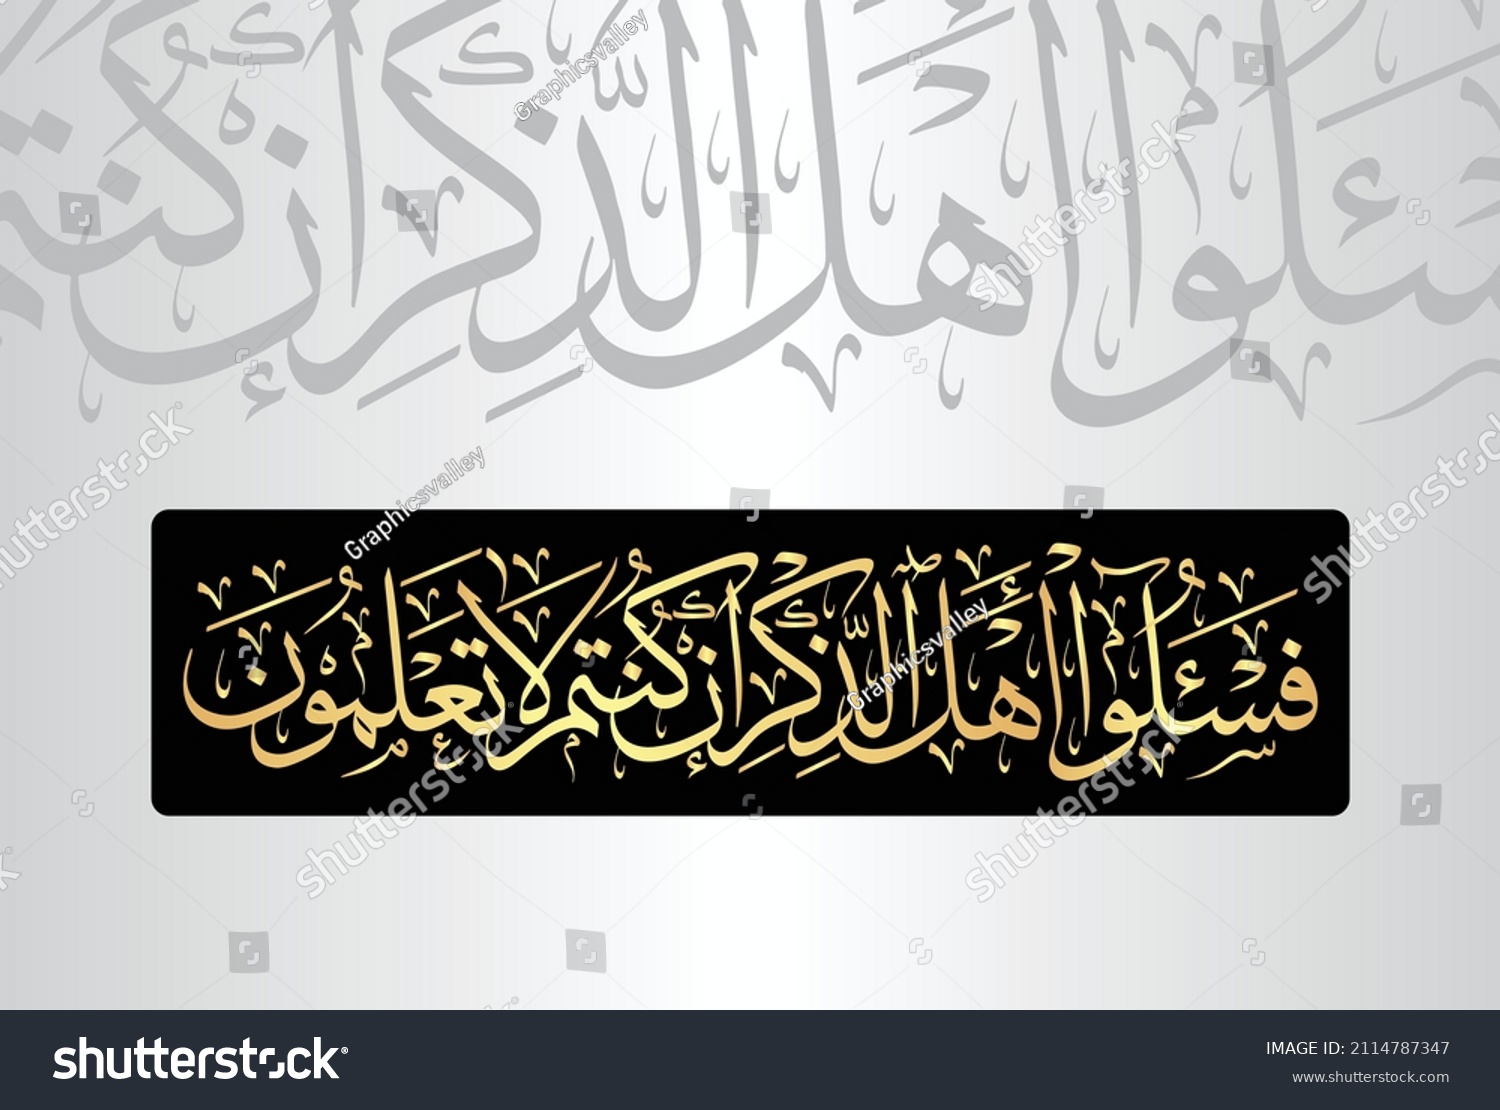 SVG of Arabic Calligraphy, verse no 43 from chapter 